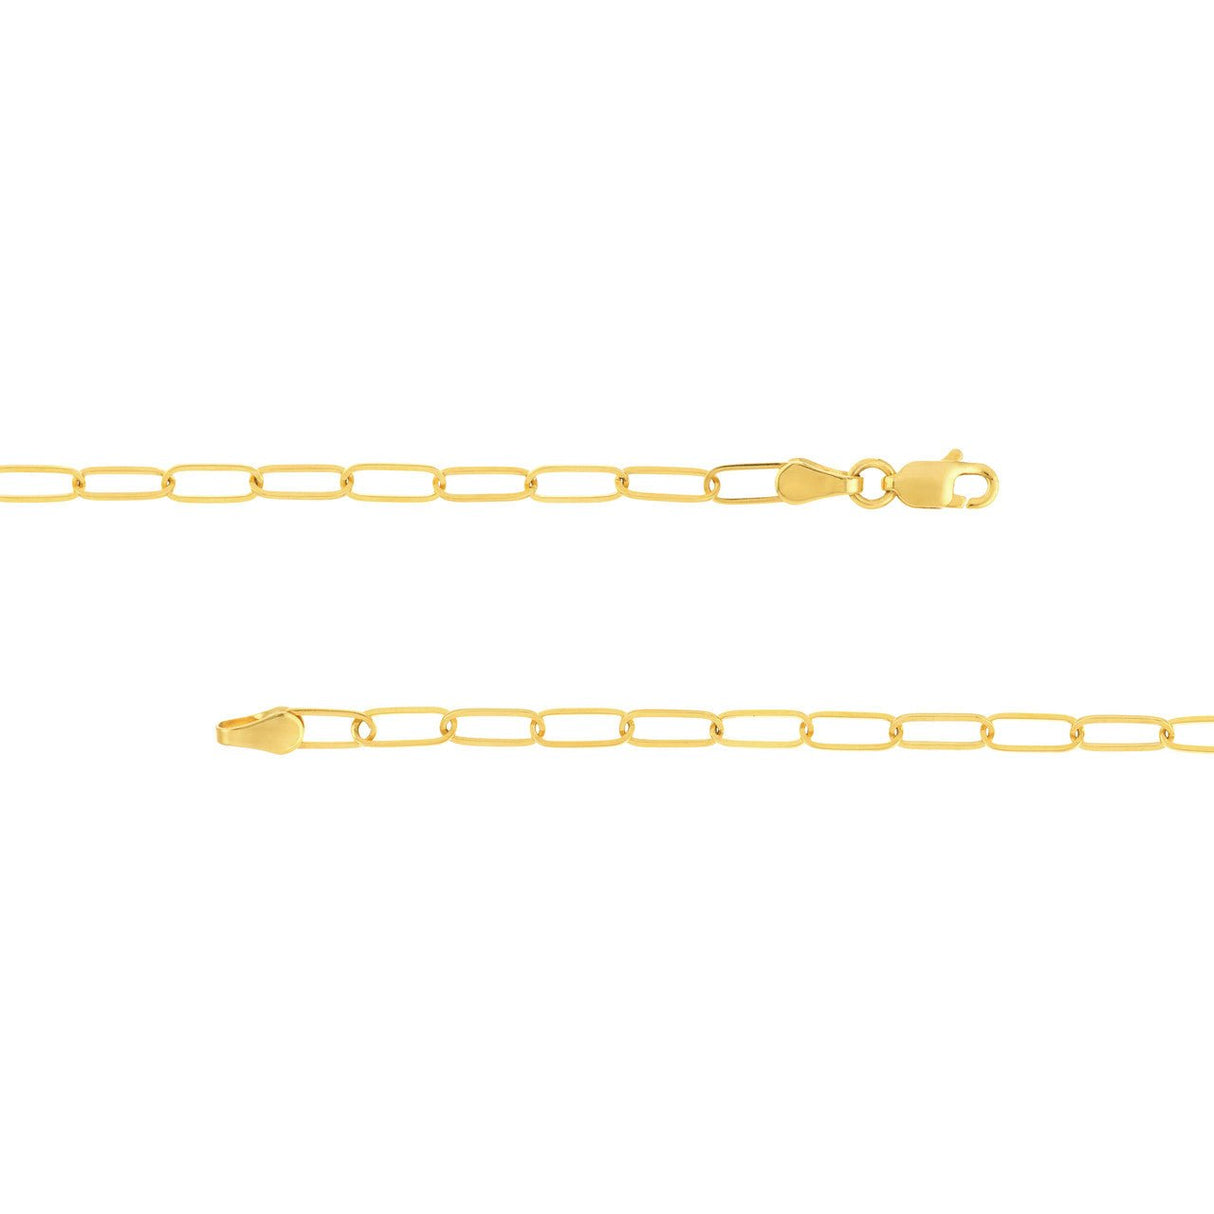 Paperclip gold chain, trendy gold chain, modern gold chain, minimalist gold chain, layering gold chain, lightweight gold chain, luxurious gold chain, fashionable gold chain, versatile gold chain, stylish gold chain, unique gold chain, sleek gold chain, high-quality gold chain, affordable gold chain, elegant gold chain, durable gold chain, gold-plated chain, gold jewelry, accessory, fashion, style.